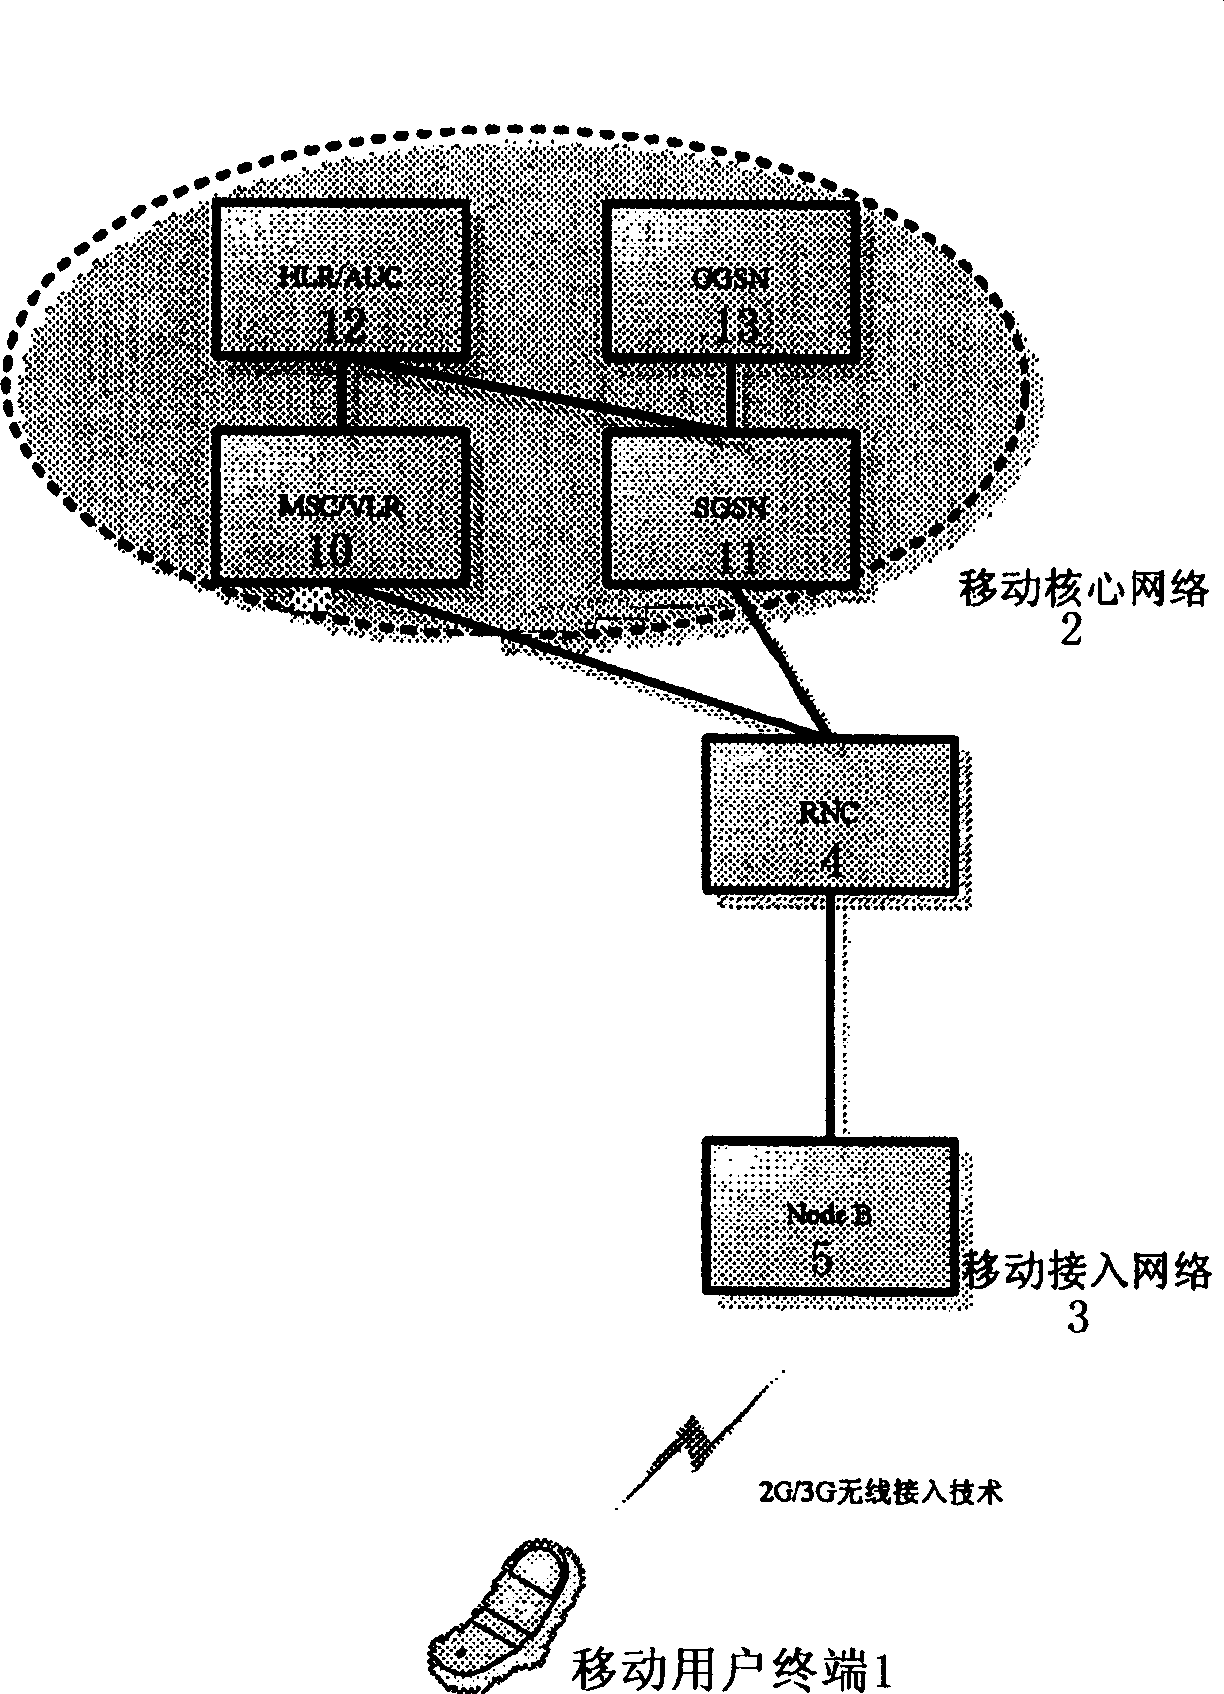 System and method for realizing mobile service via broadband wireless access